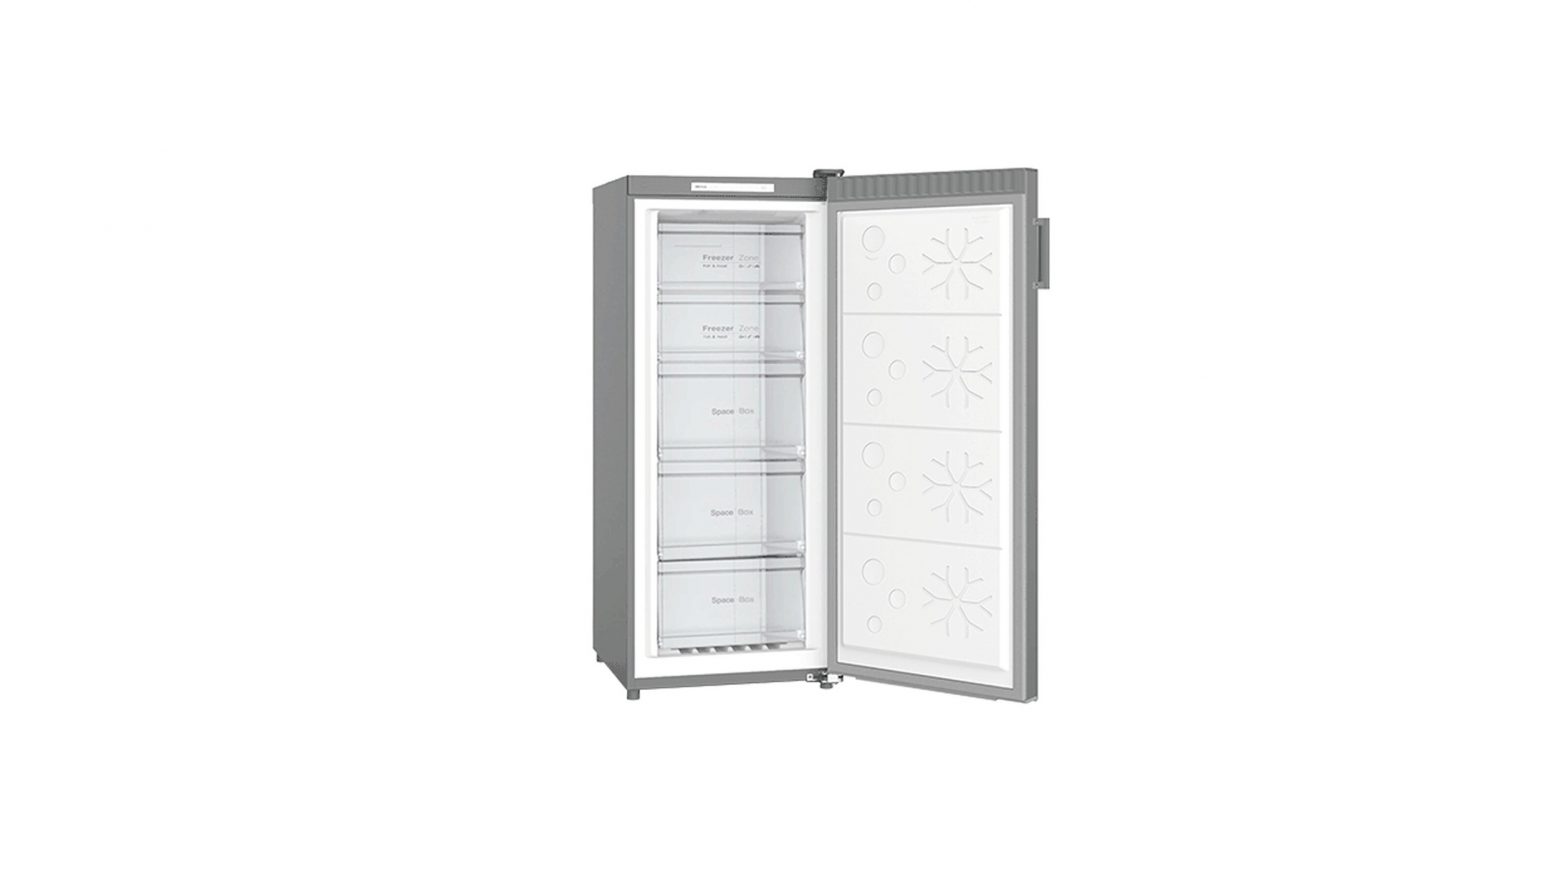 CHiQ Frost Free Upright Freezer CSF165NSS Specifications